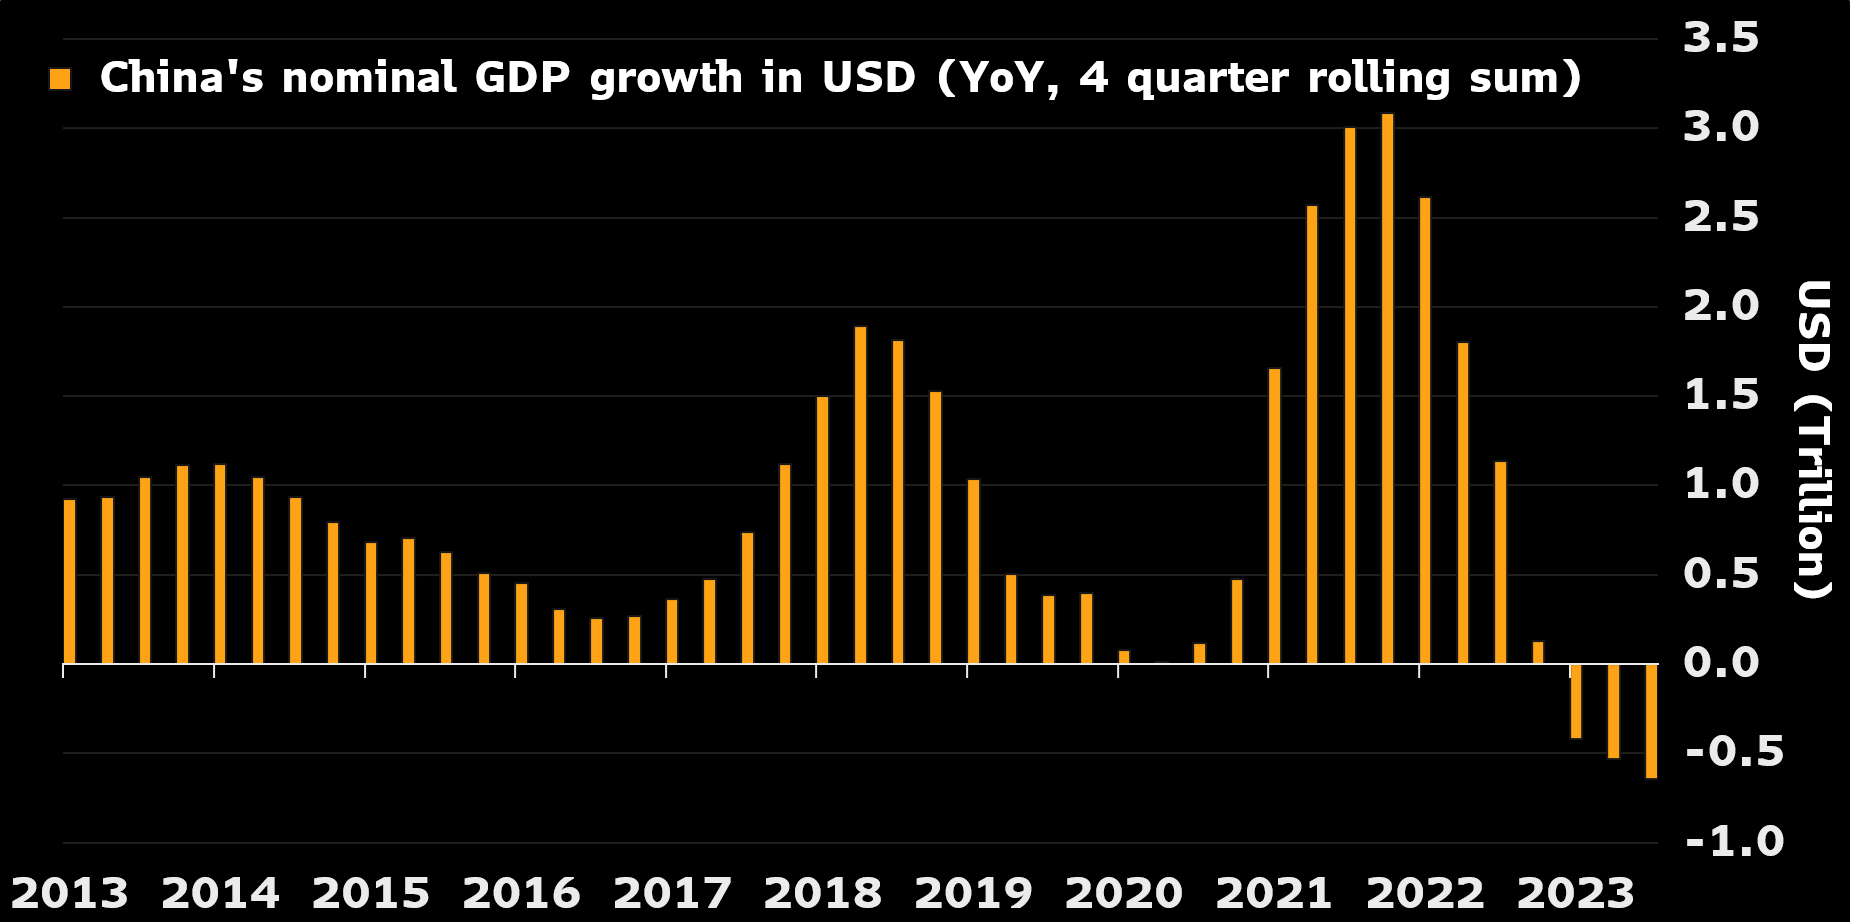 China's Nominal GDP Growth in USD as of November 15th, 2023. Source: Holger Zschaepitz